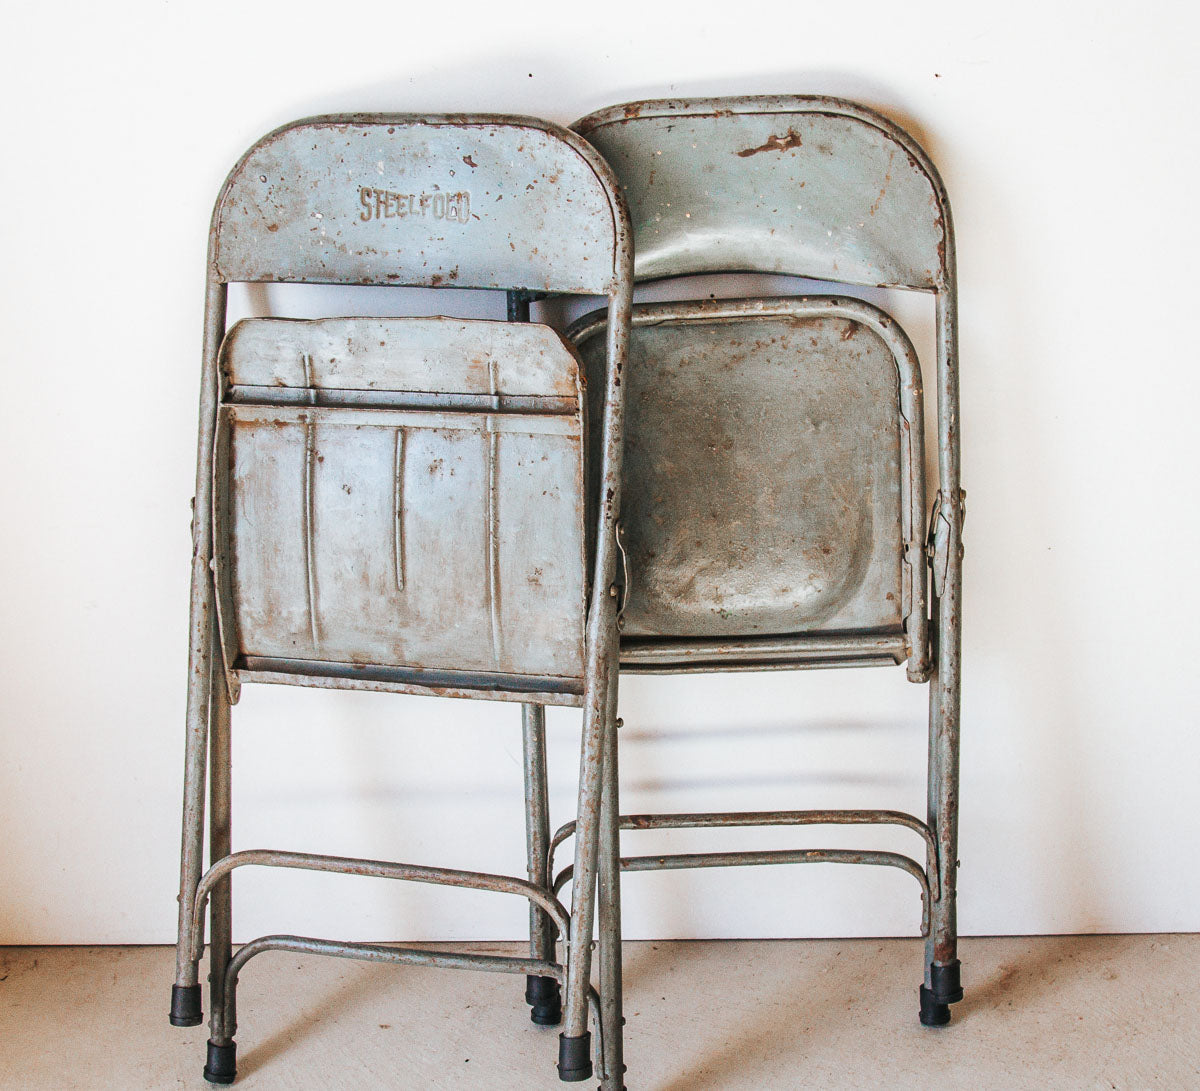 vintage recycled iron folding chair made in india